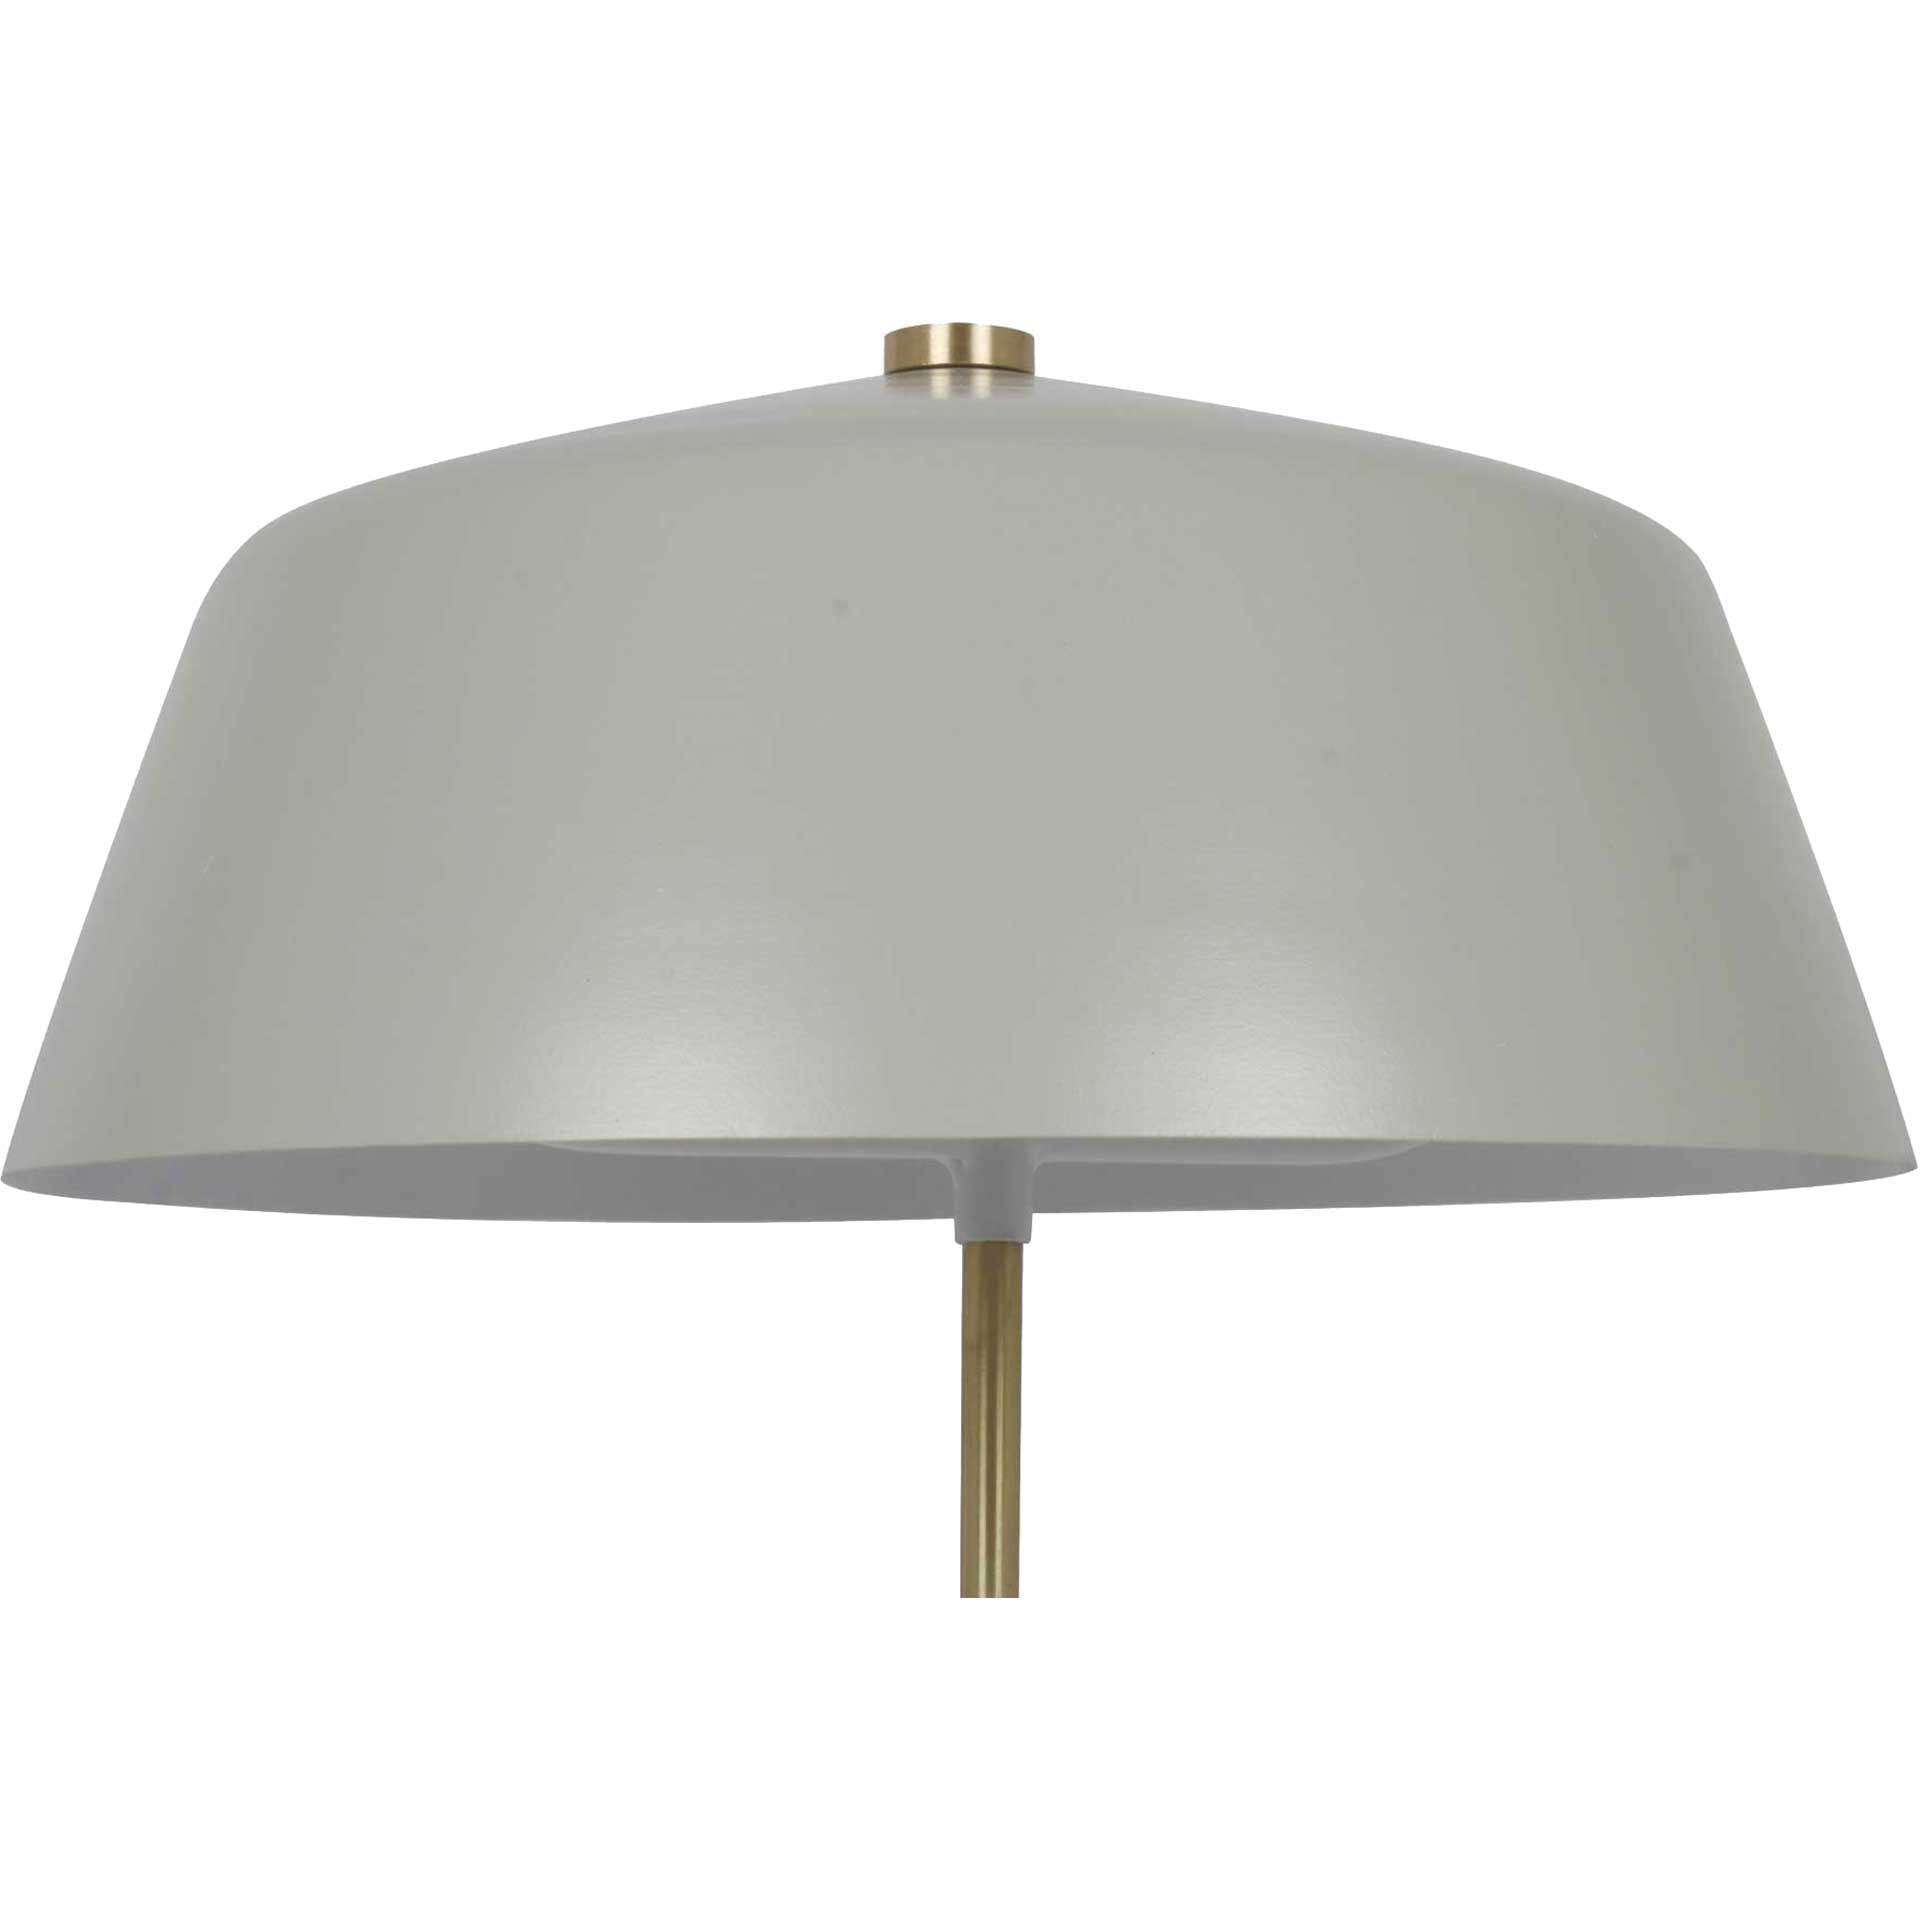 Diana Table Lamp Antique Brass/Gray